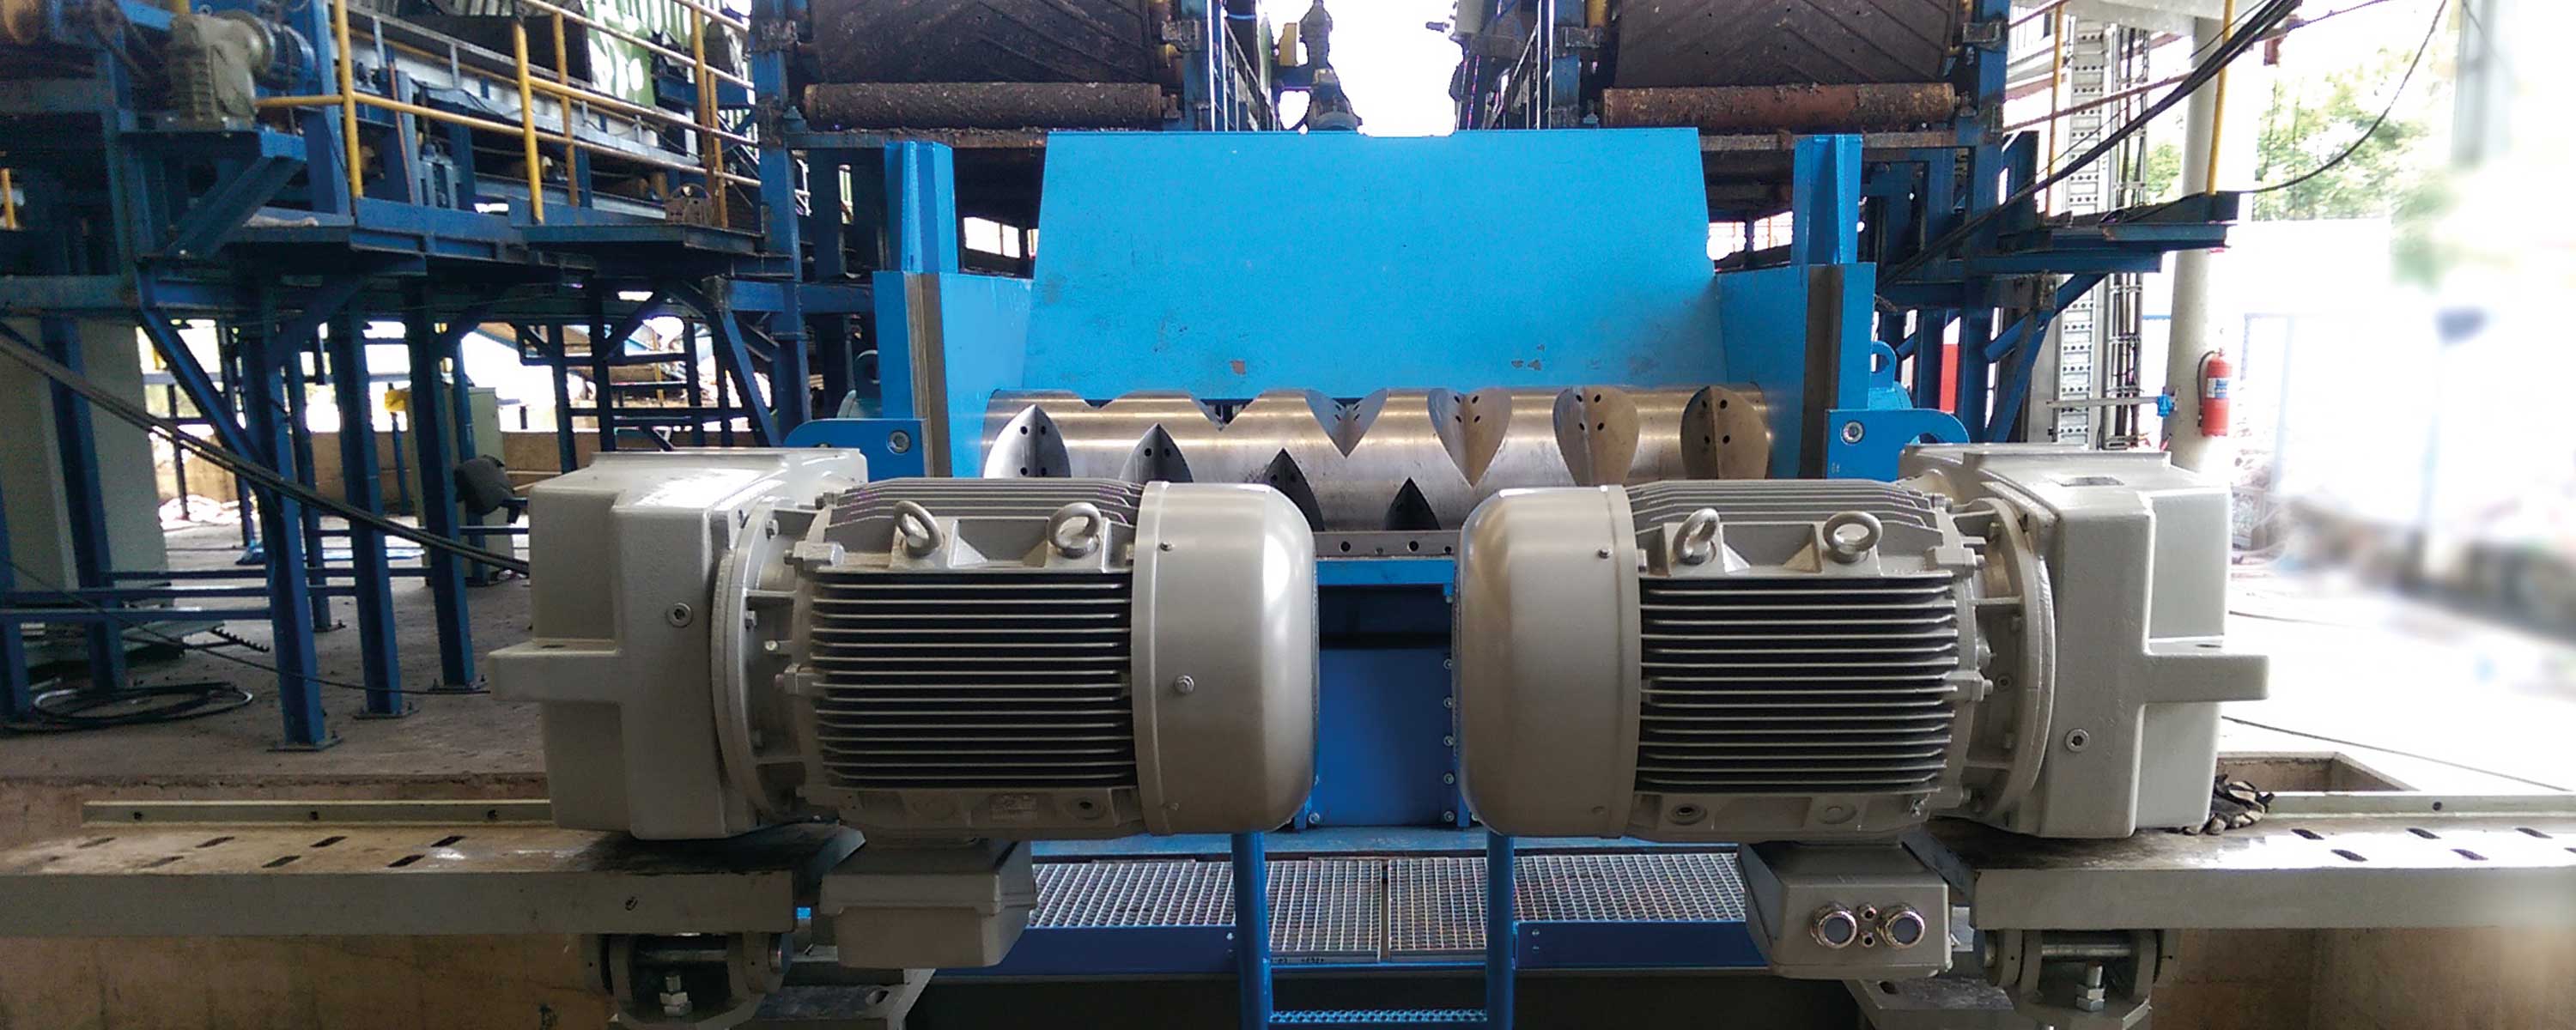 Gearboxes on recycling machinery